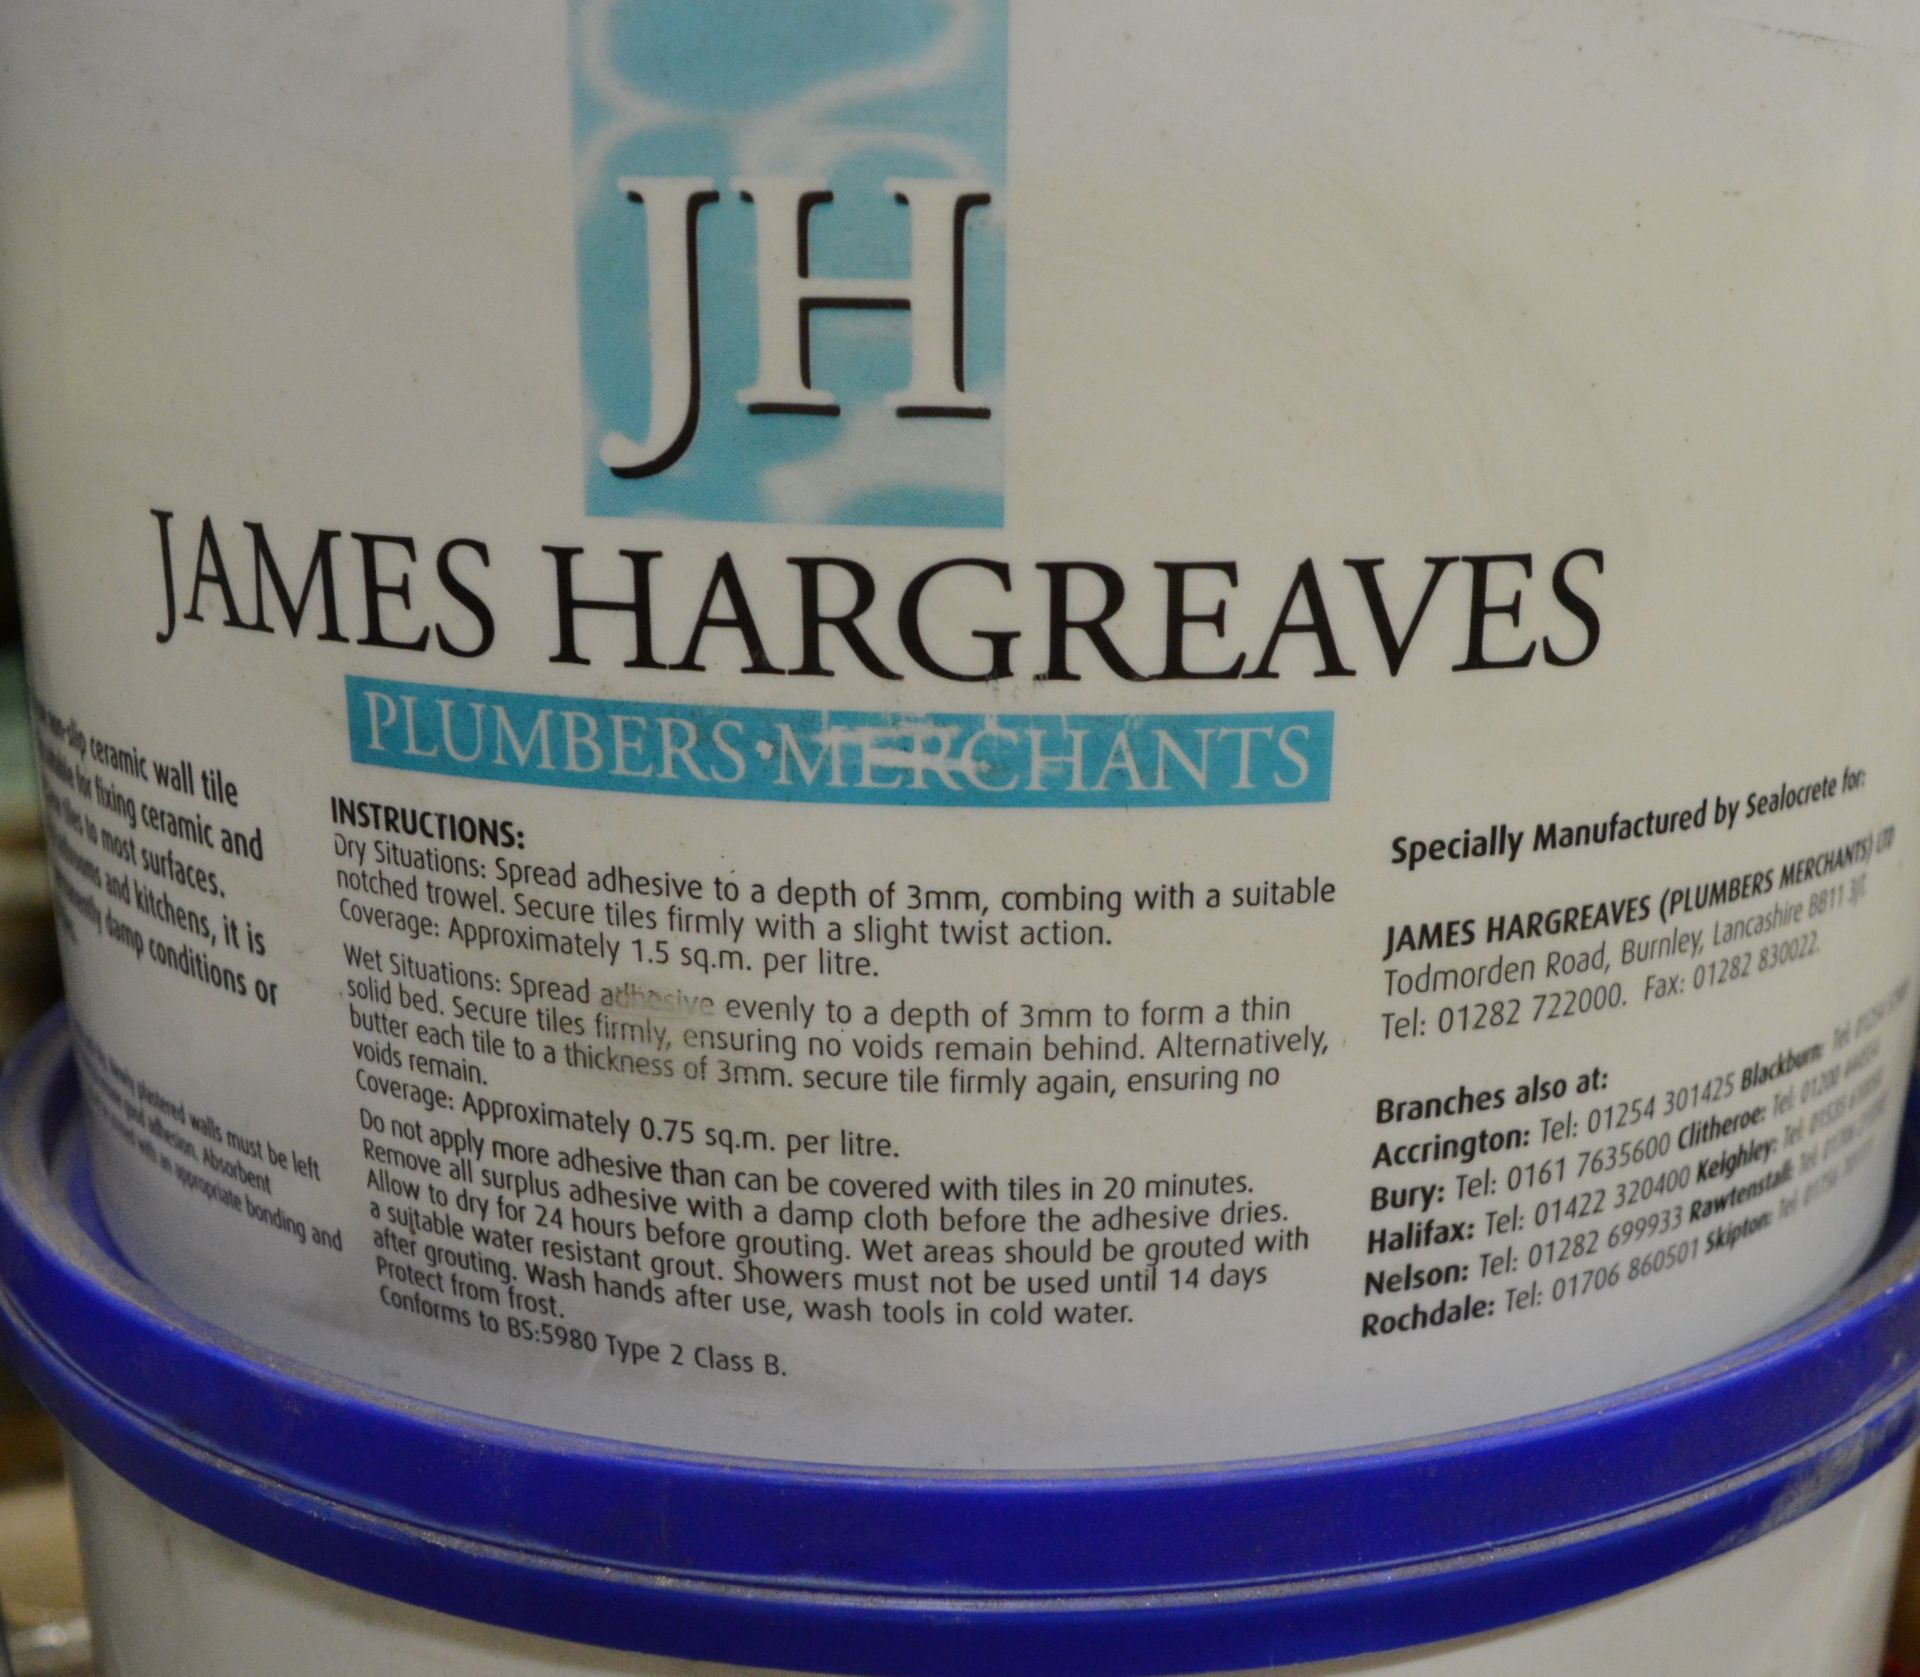 4x 10 ltr James Hargreaves Ceramic Wall Tile Adhesive. - Image 2 of 2